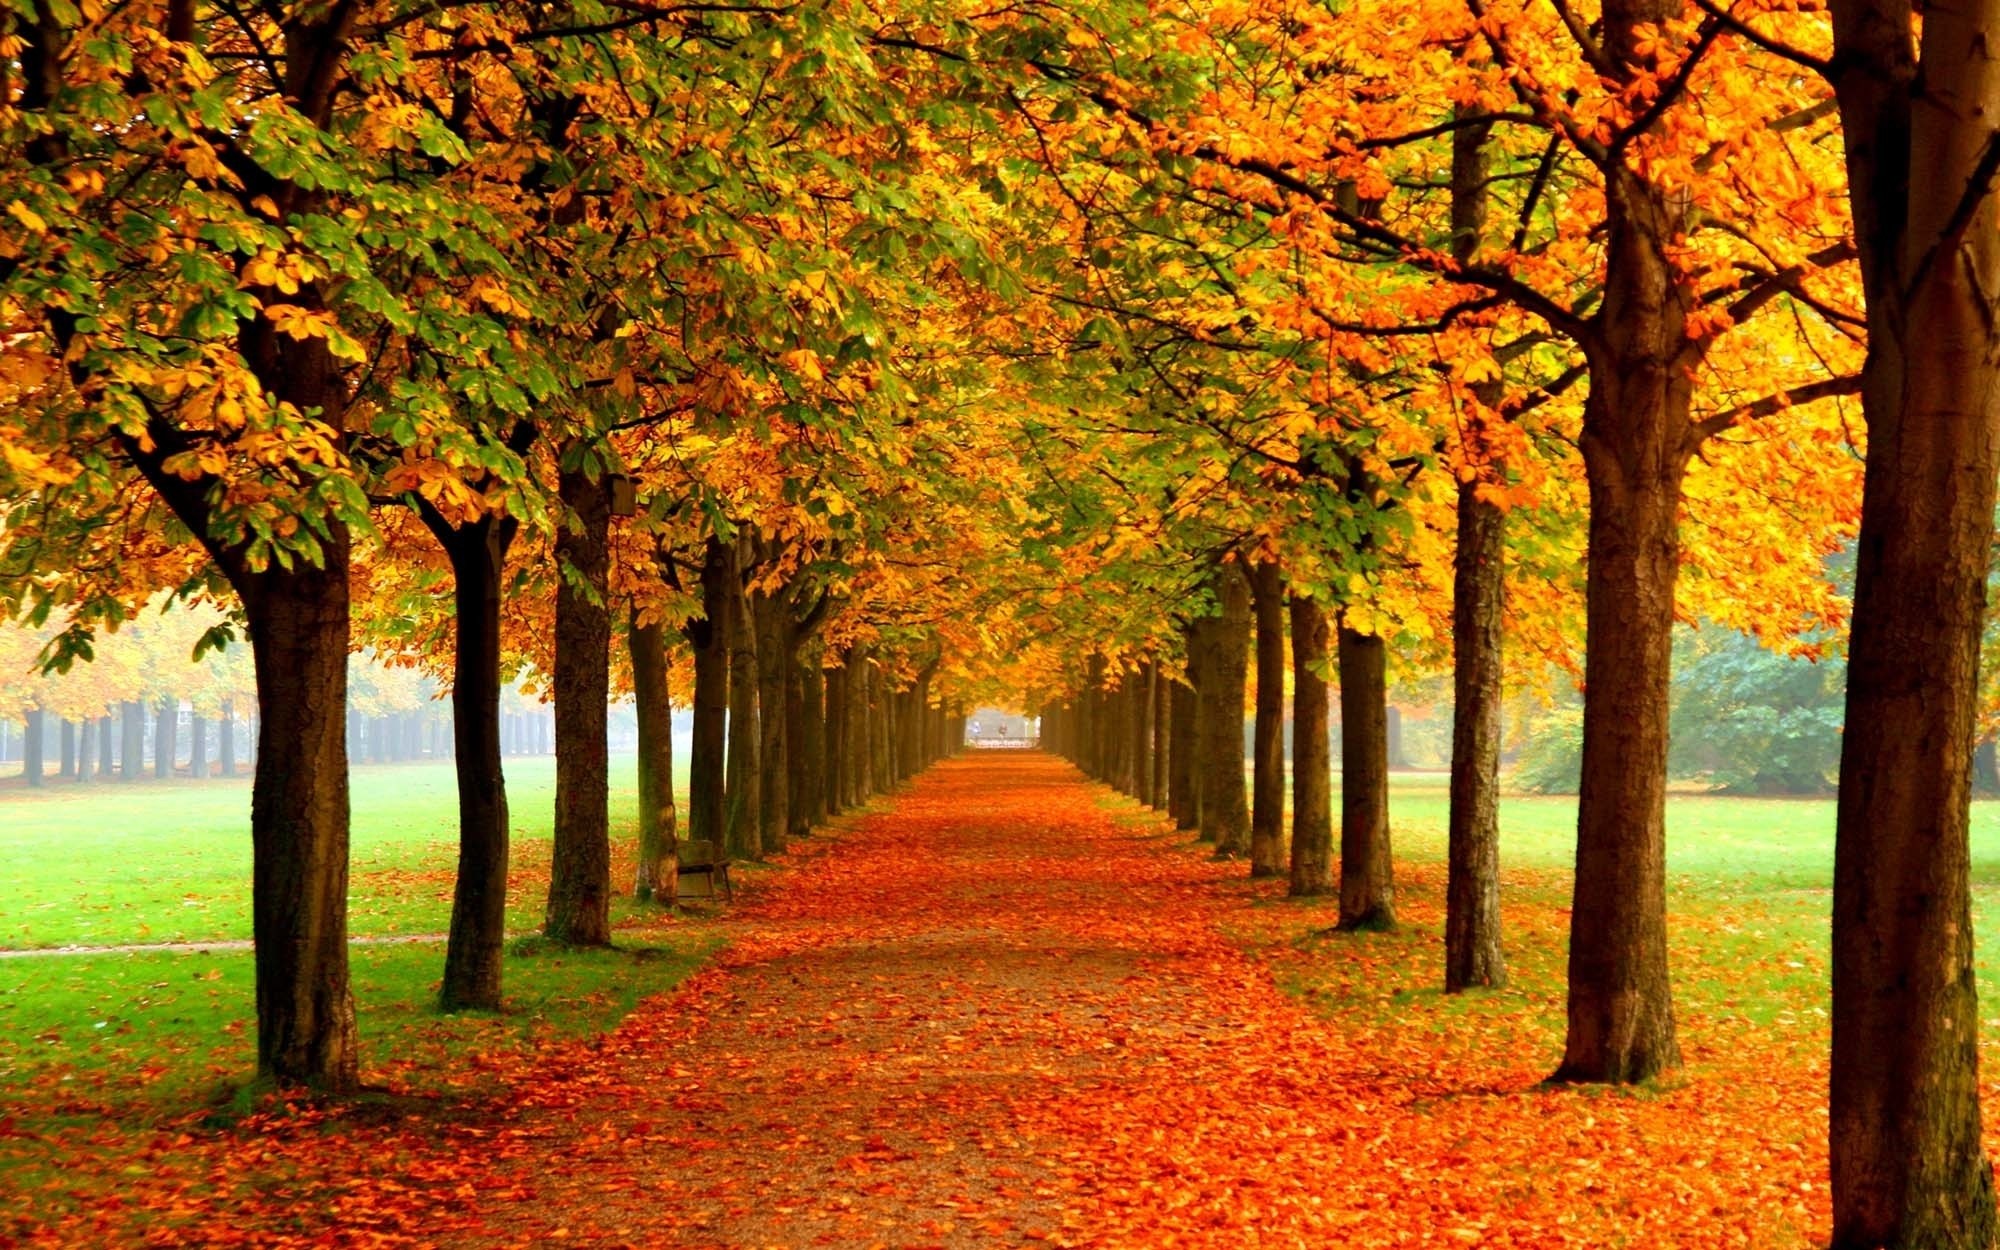 2000x1250 Title : fall wallpaper and screensavers (54+ images) Dimension : 2000 x  1250. File Type : JPG/JPEG